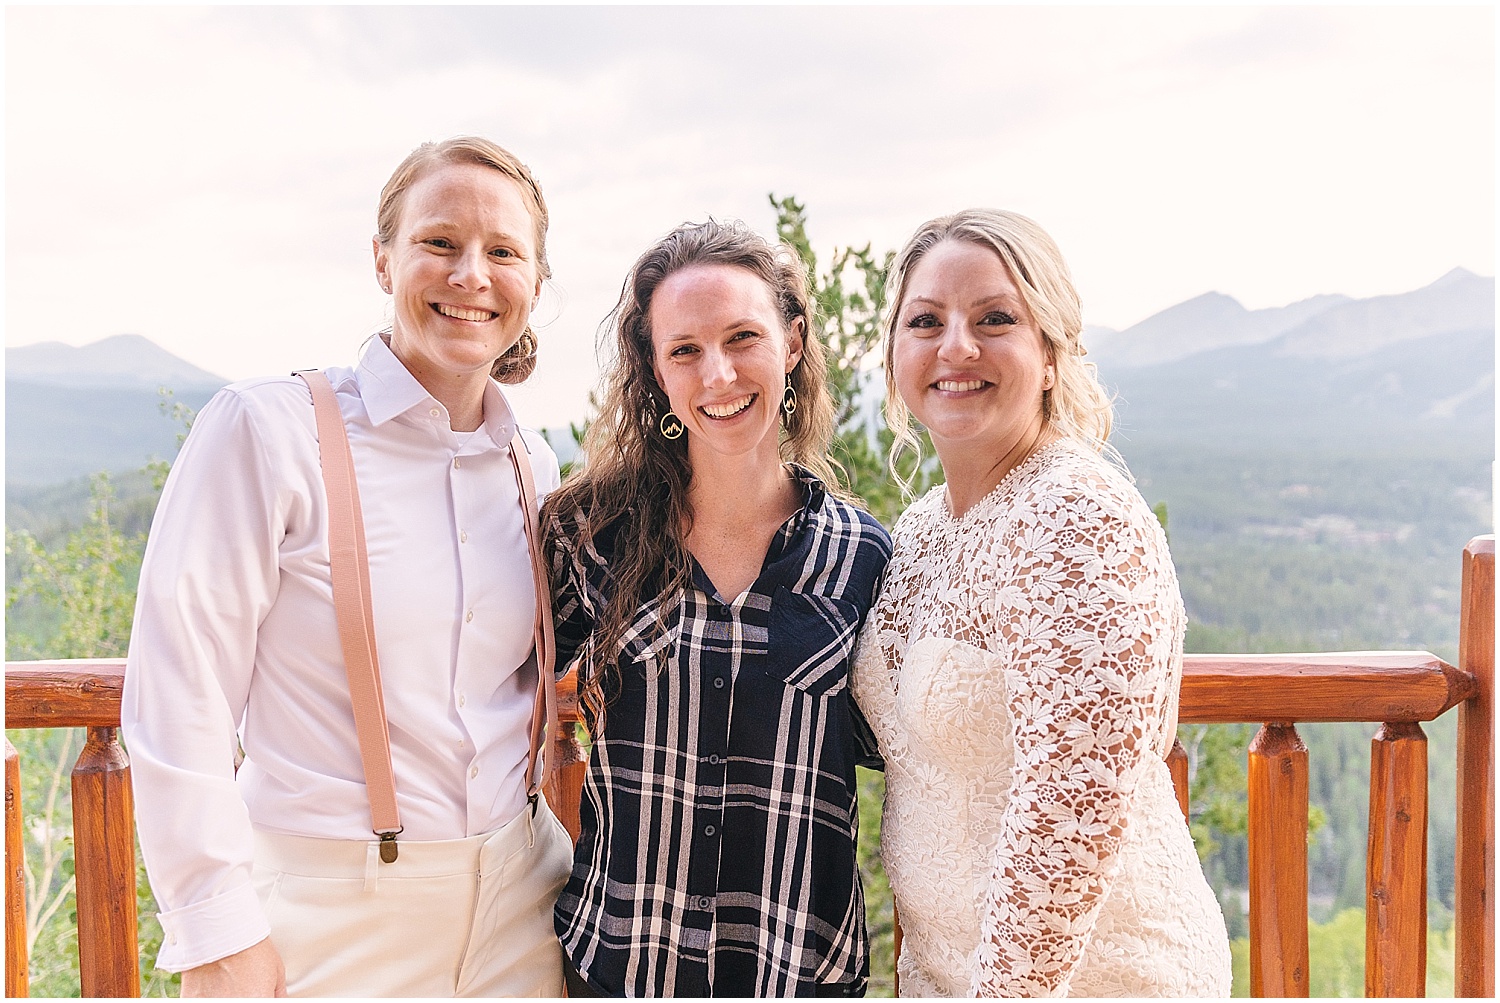 Me with my two brides at their wedding in Breckenridge